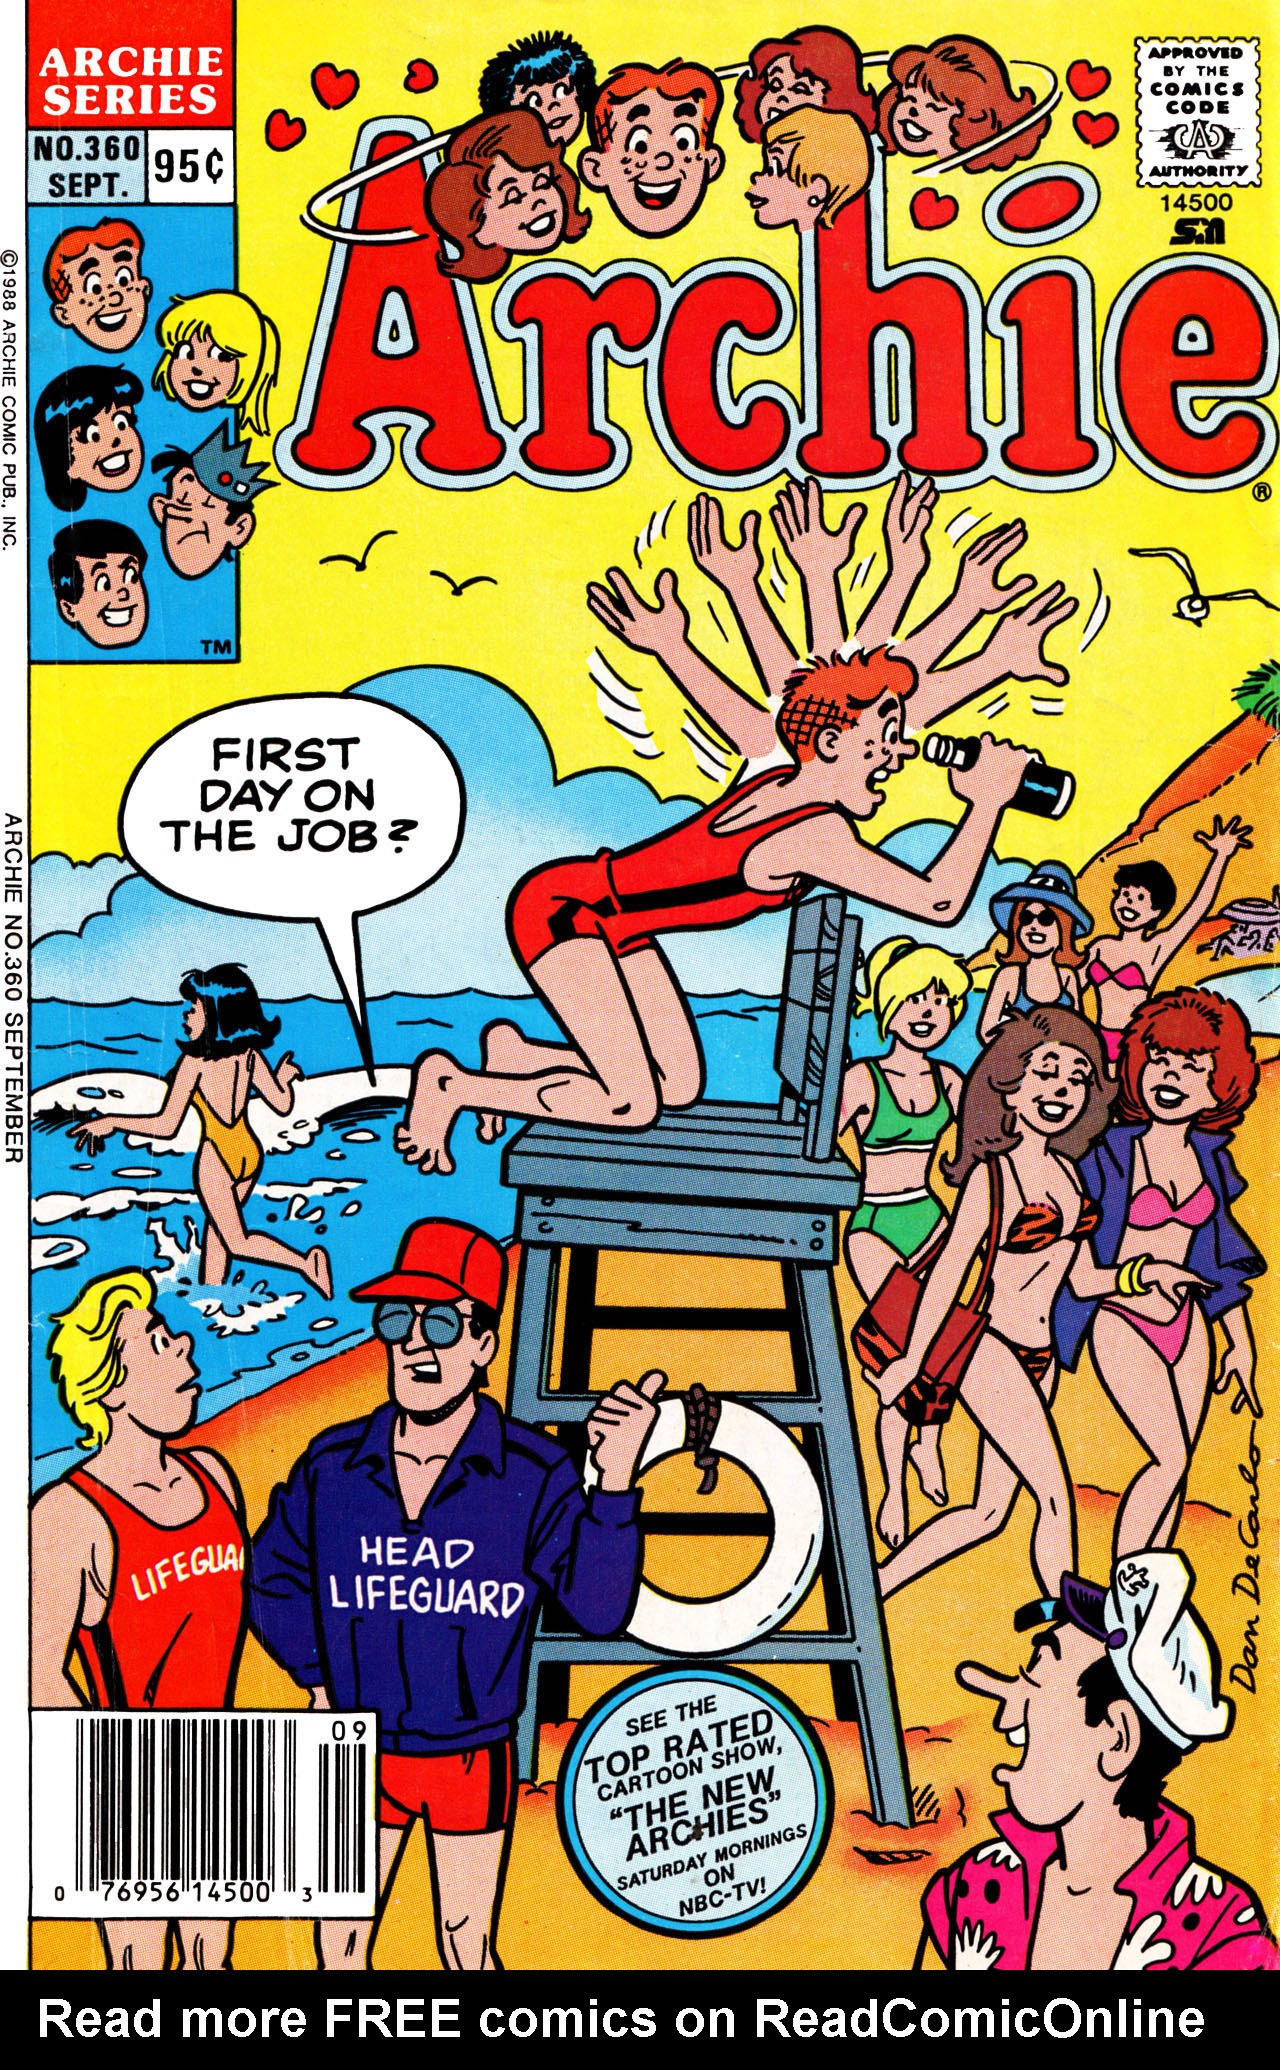 Archie 1960 Issue 360 | Read Archie 1960 Issue 360 comic online in high  quality. Read Full Comic online for free - Read comics online in high  quality .